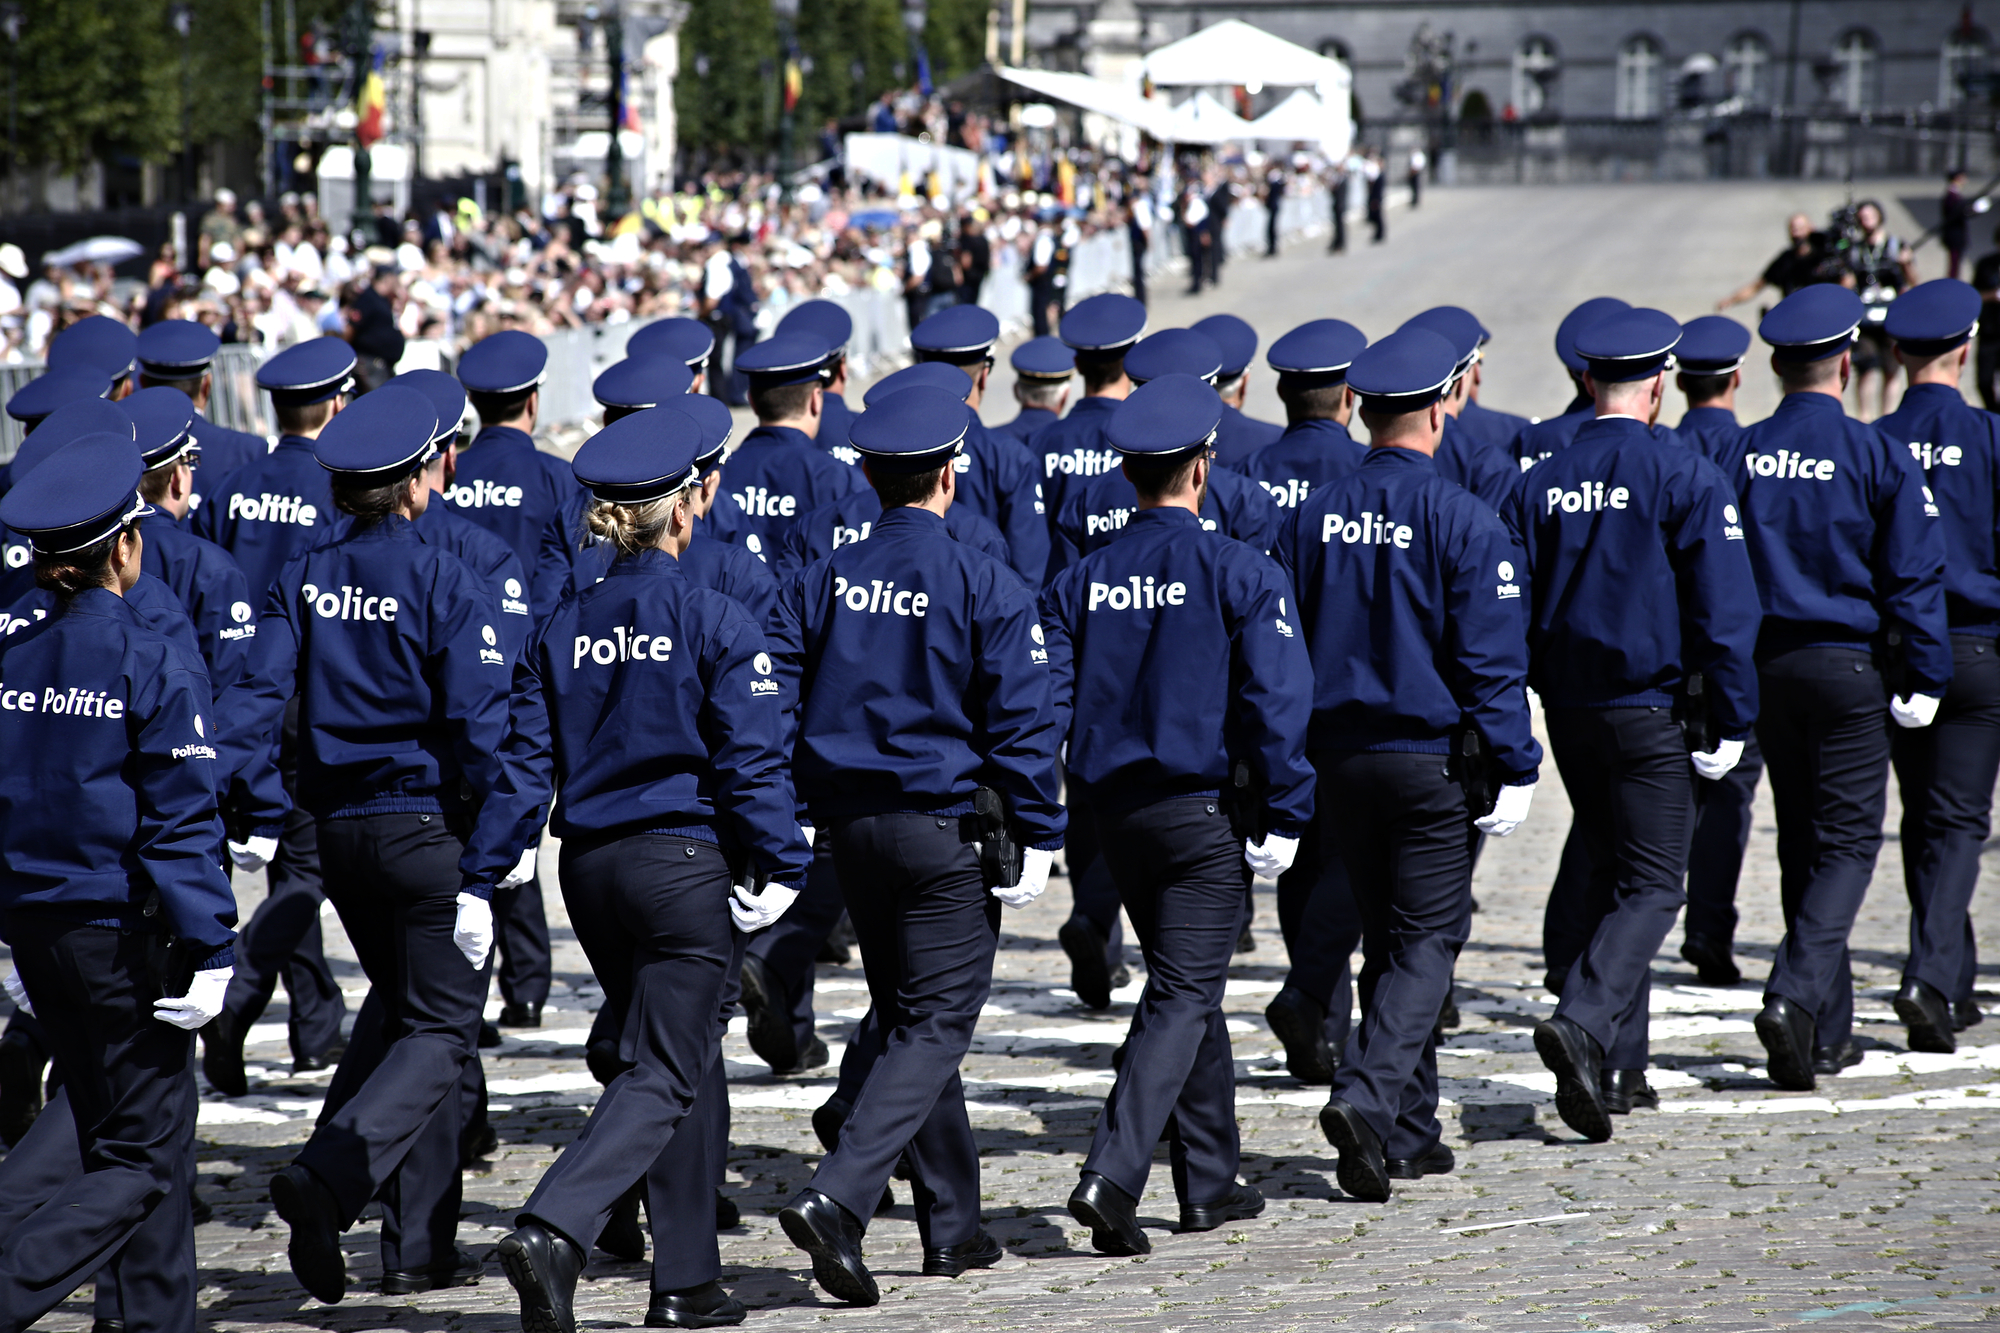 Police of Brussels